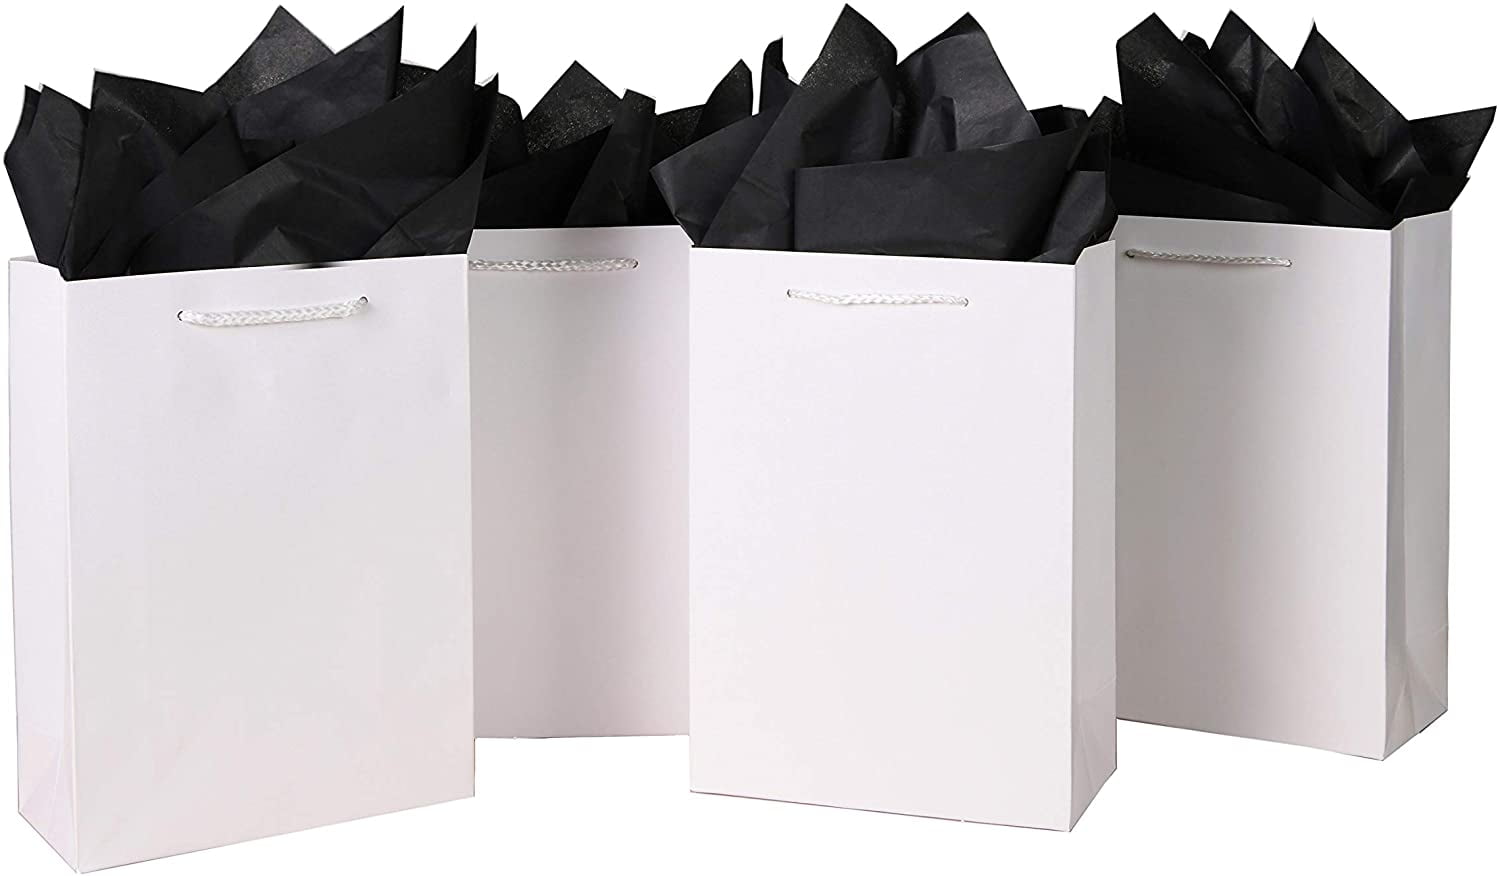 10 Pcs White Gift Bags (8x4x11) Gift Bags with Black Tissue Paper  Luxury  Matte White Paper Bags with Handles Perfect for Birthday Parties, Weddings  